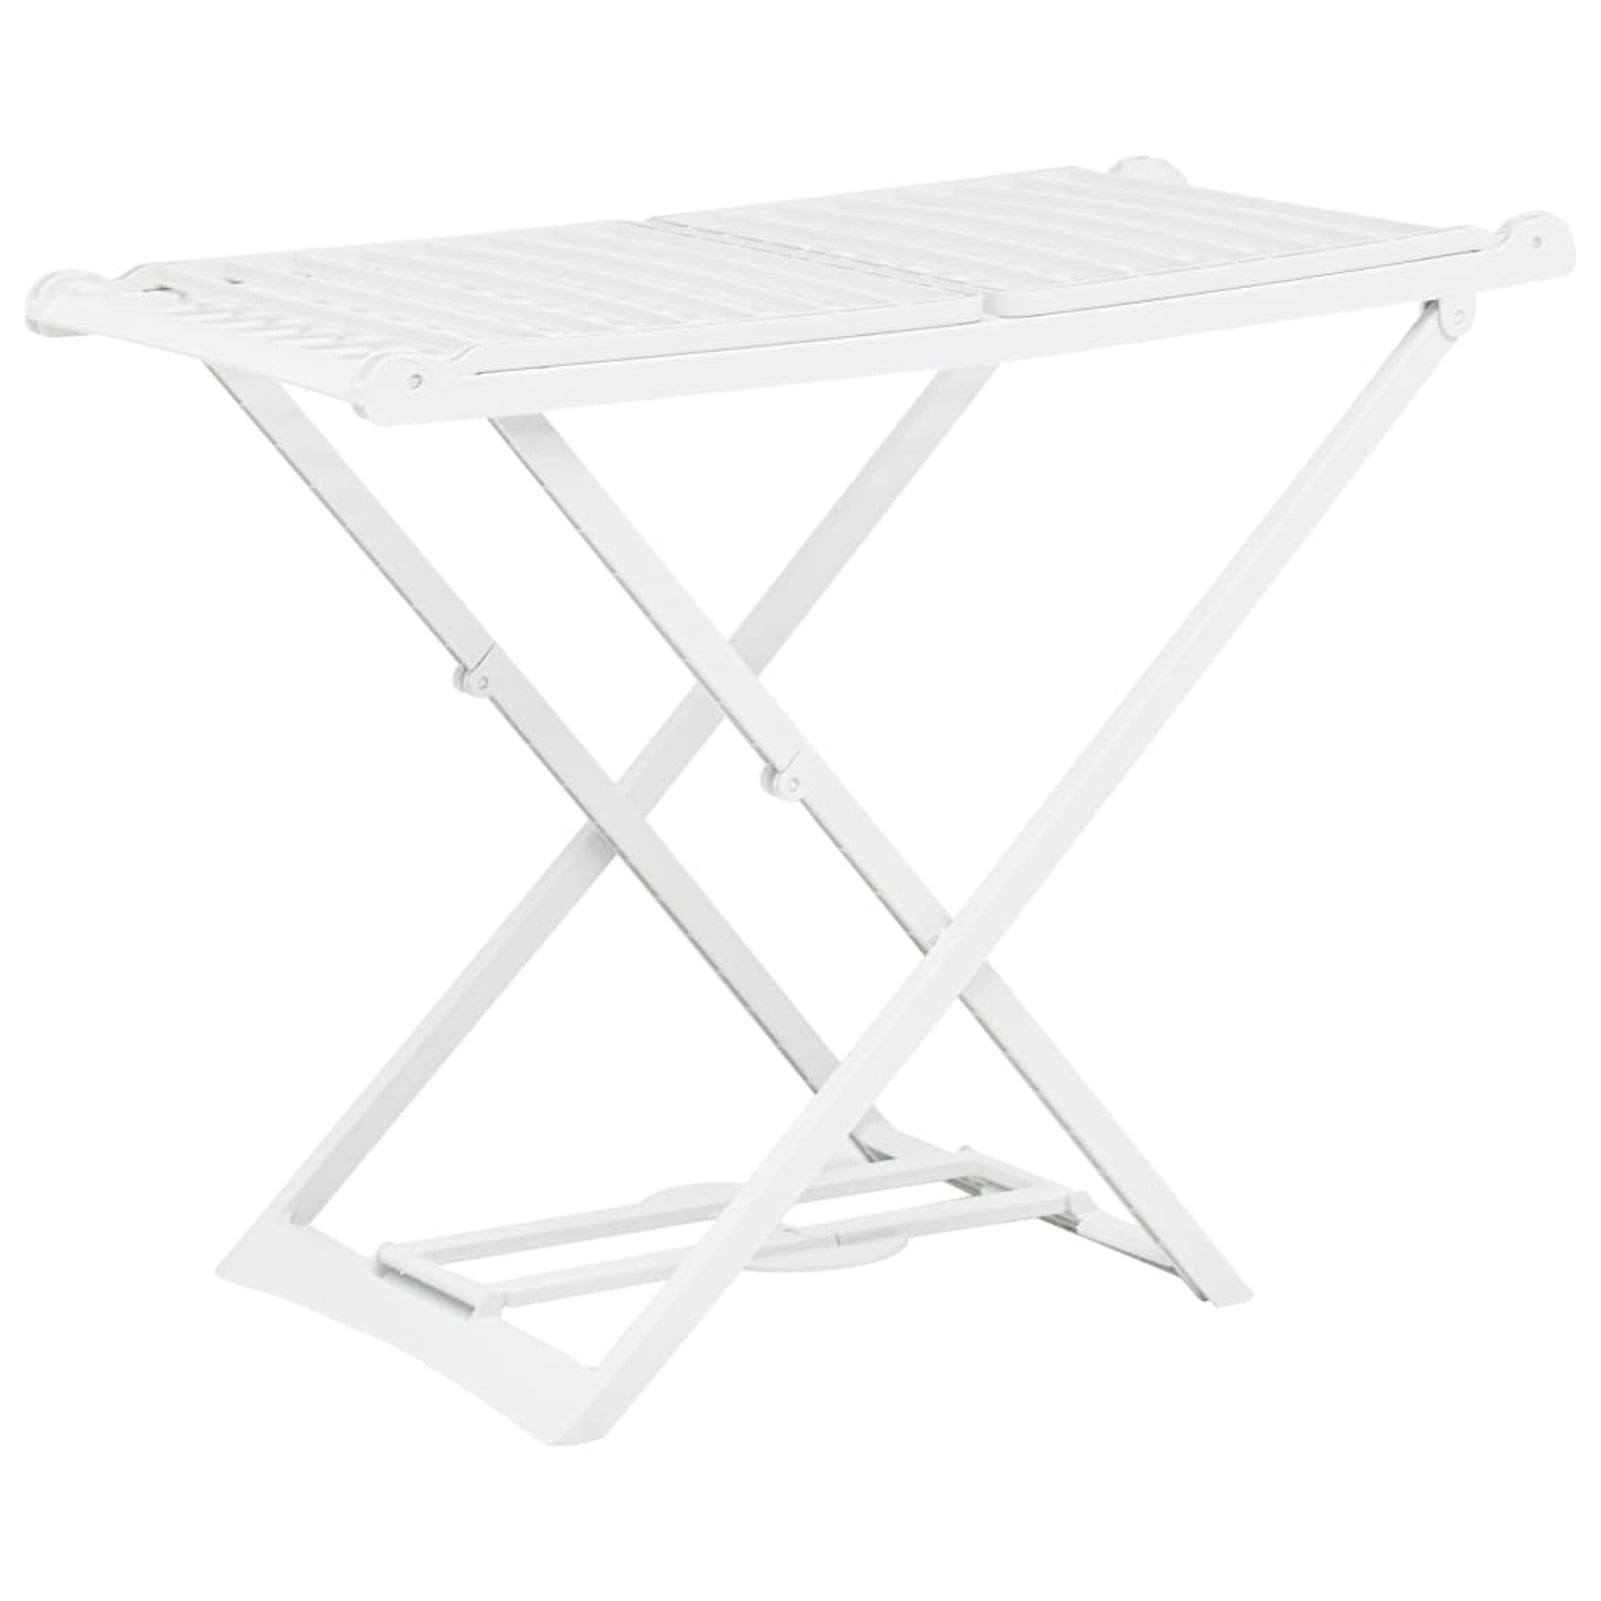 Details about   Stainless Steel Indoor Airer Metal Easy Foldable Portable Clothes Drier White 